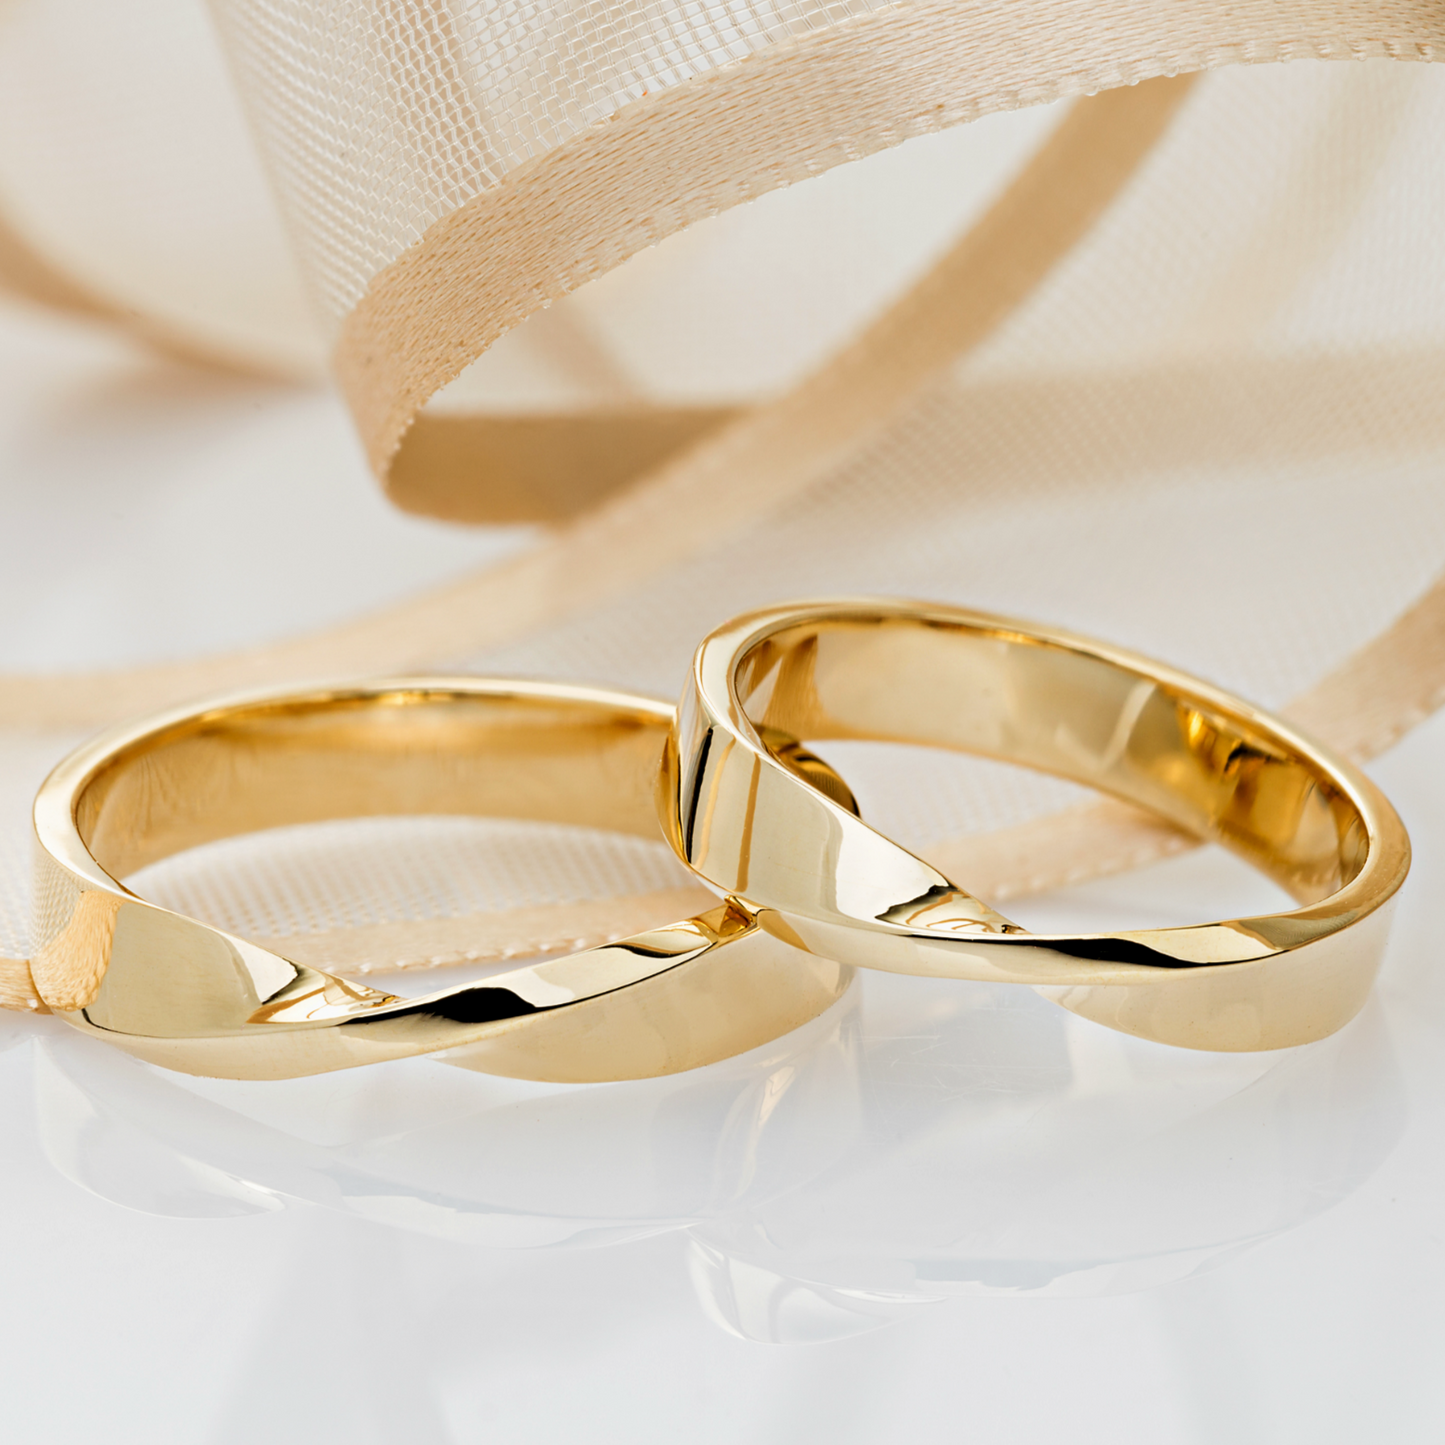 Matching Mobius Wedding Bands. His and Hers Mobius wedding rings set. Gold Mobius Rings. Couple rings set. His and hers matching wedding bands. Gold wedding rings